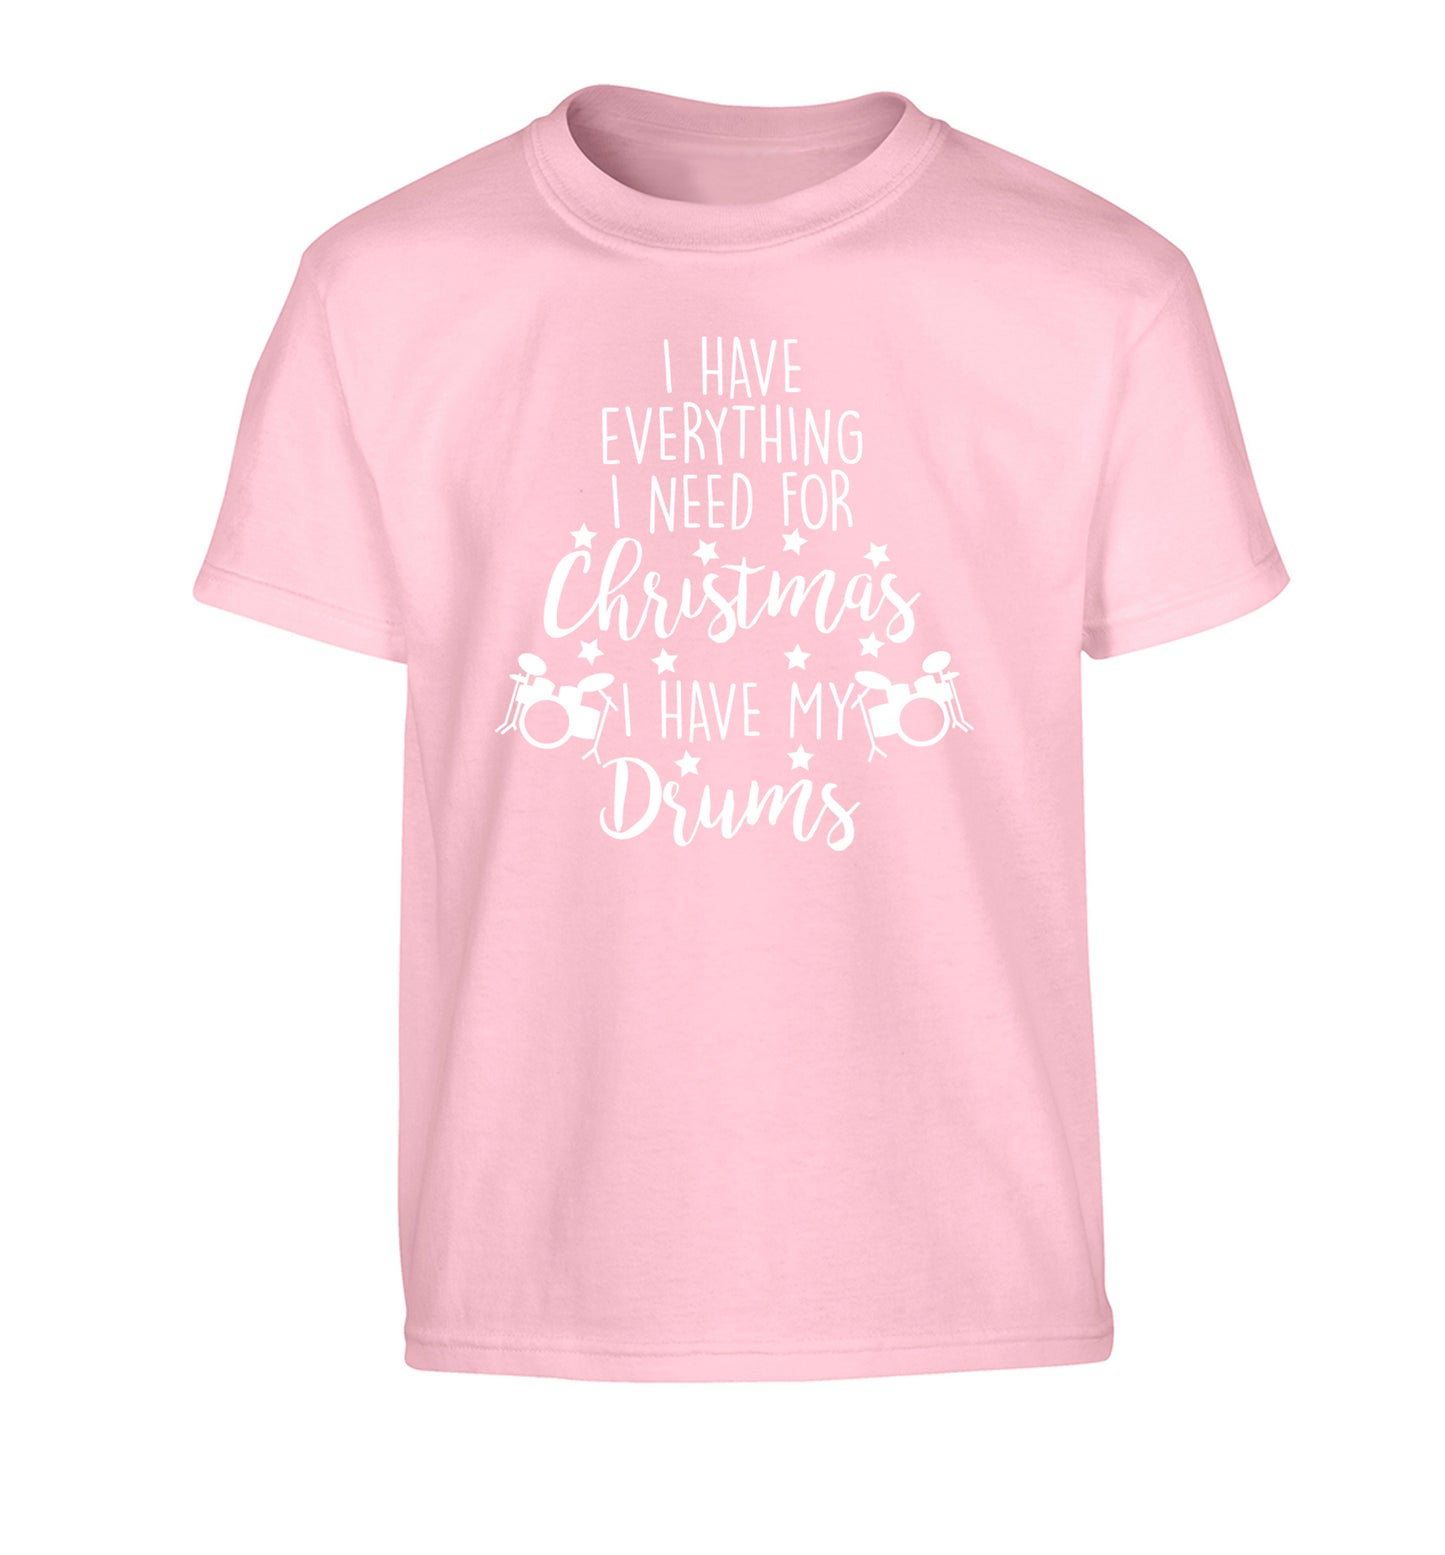 I have everything I need for Christmas I have my drums! Children's light pink Tshirt 12-14 Years